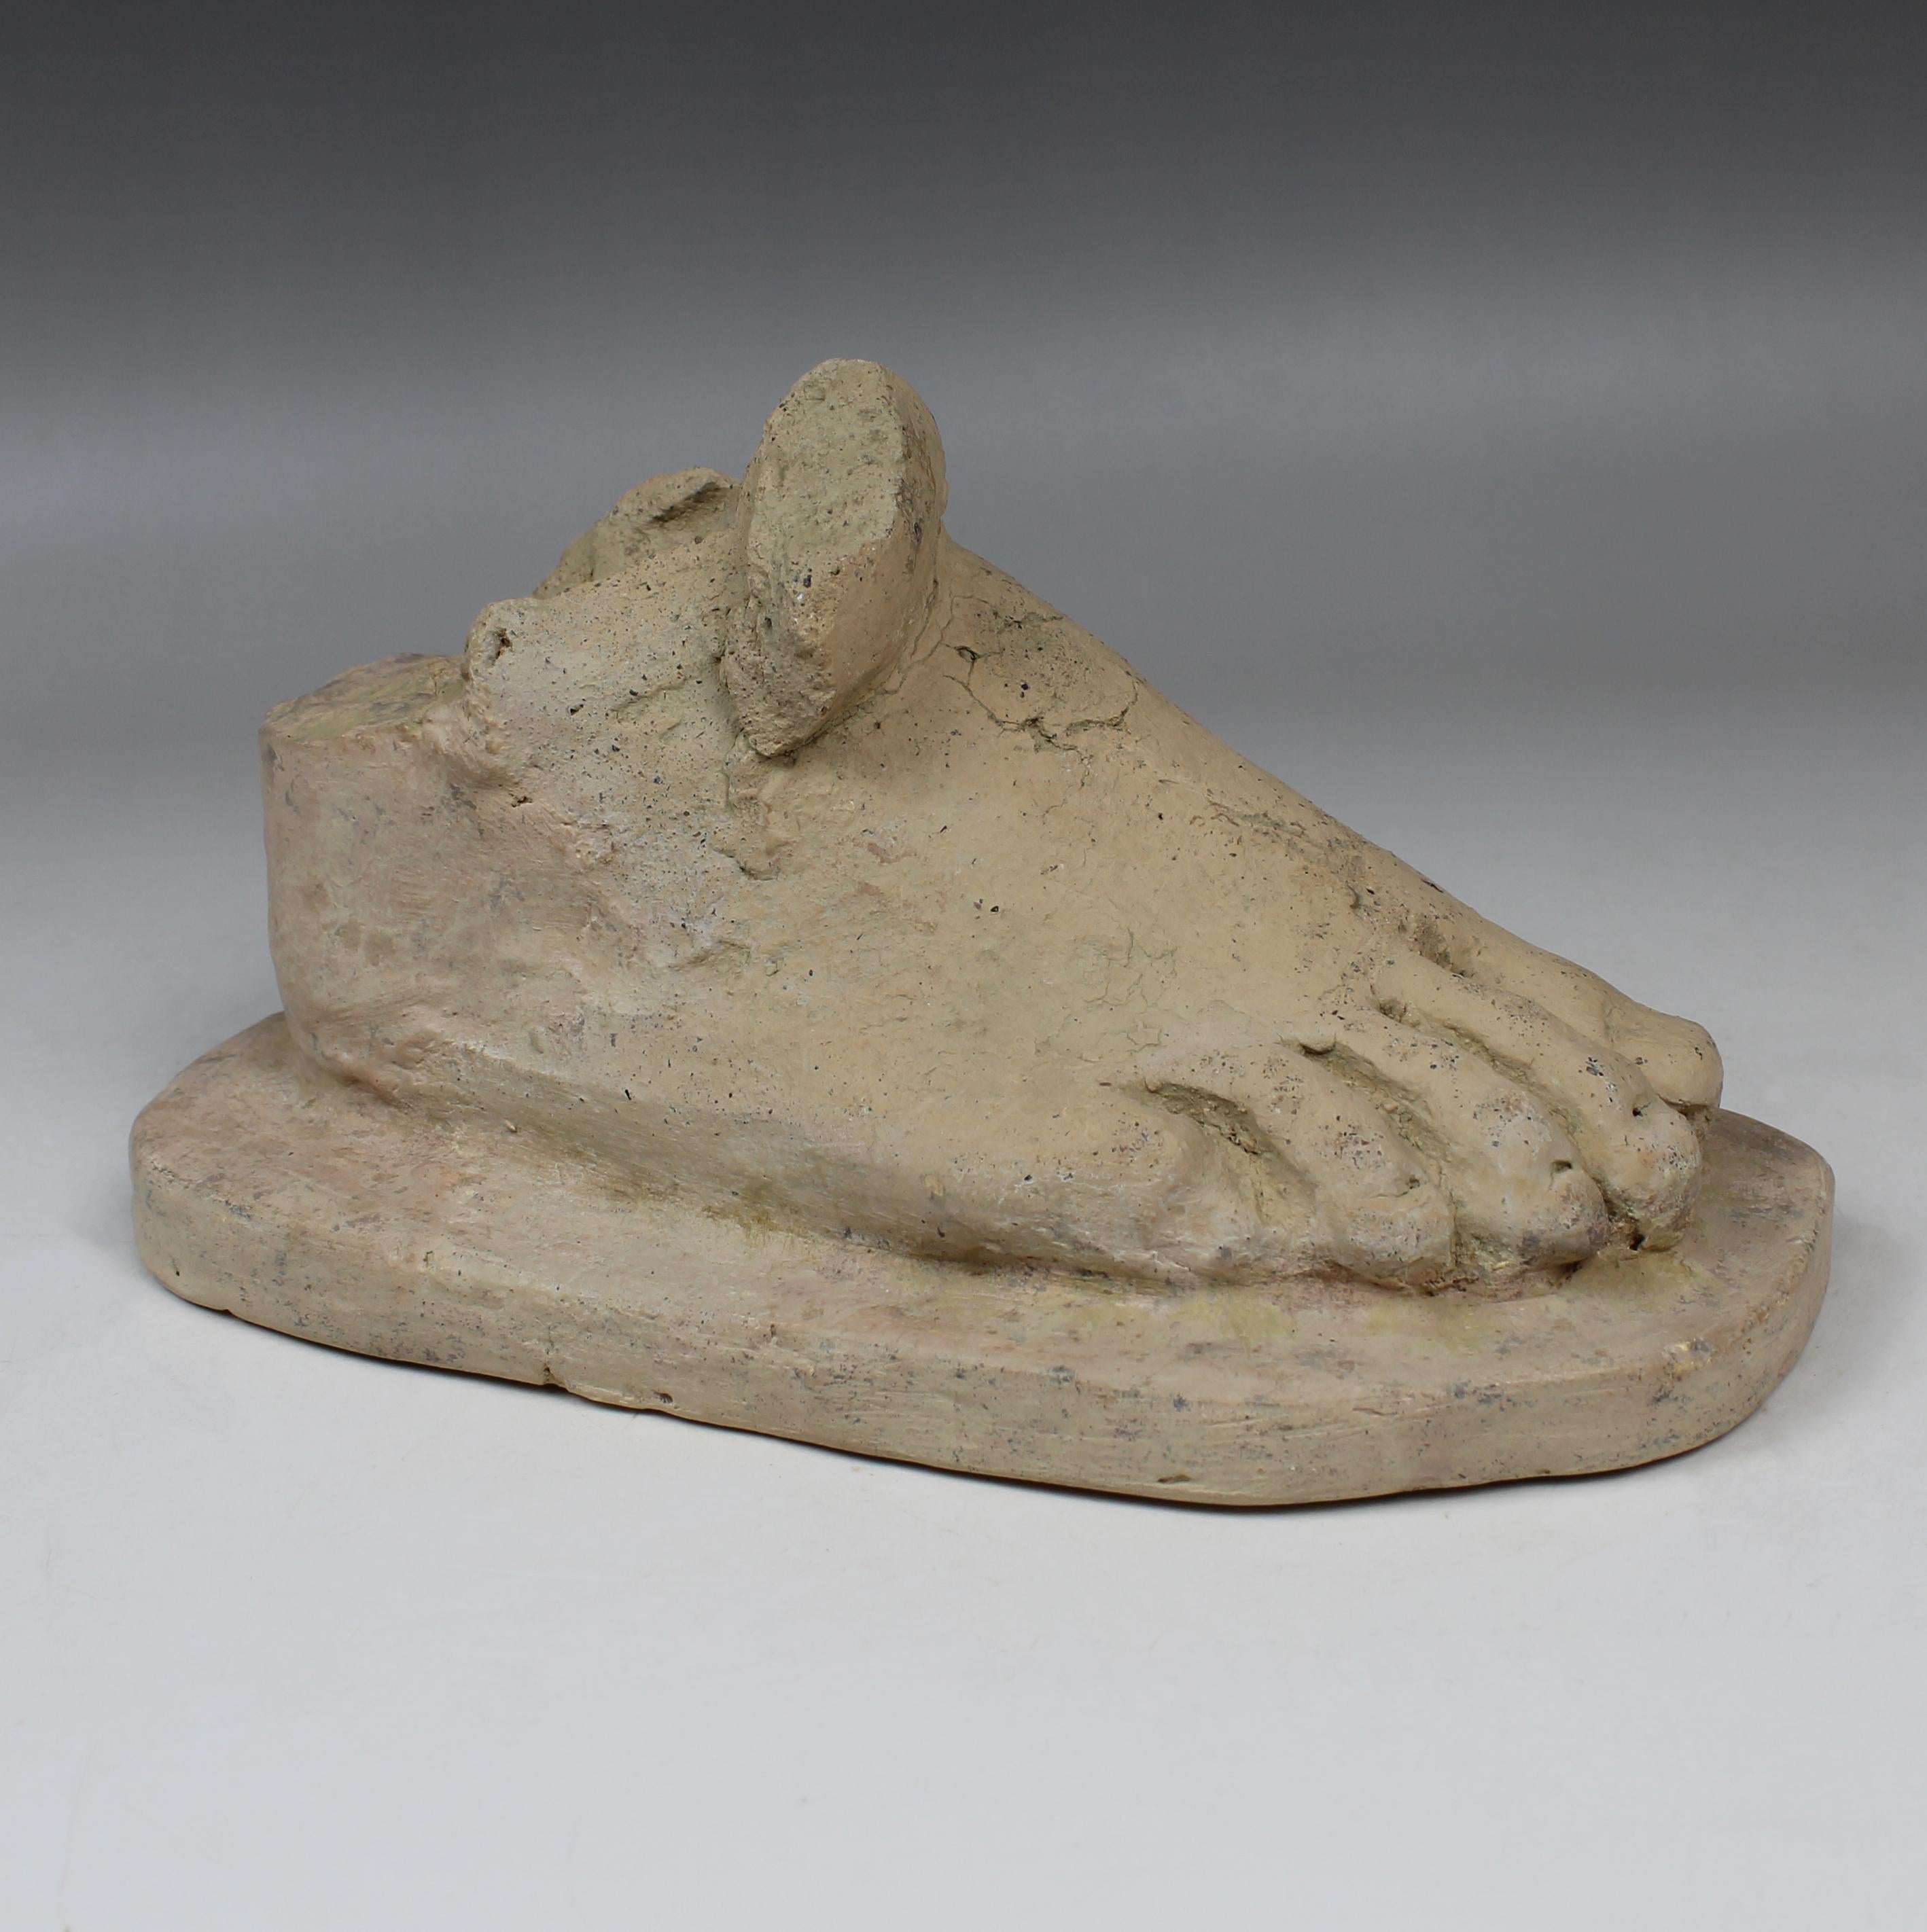 ITEM: Anatomical votive model of a foot
MATERIAL: Terracotta
CULTURE: Etruscan
PERIOD: 5th – 4th Century B.C
DIMENSIONS: 105 mm x 85 mm x 205 mm
CONDITION: Good condition
PROVENANCE: Ex Paul Suttman collection. Acquired by Suttman in the 1960’s when